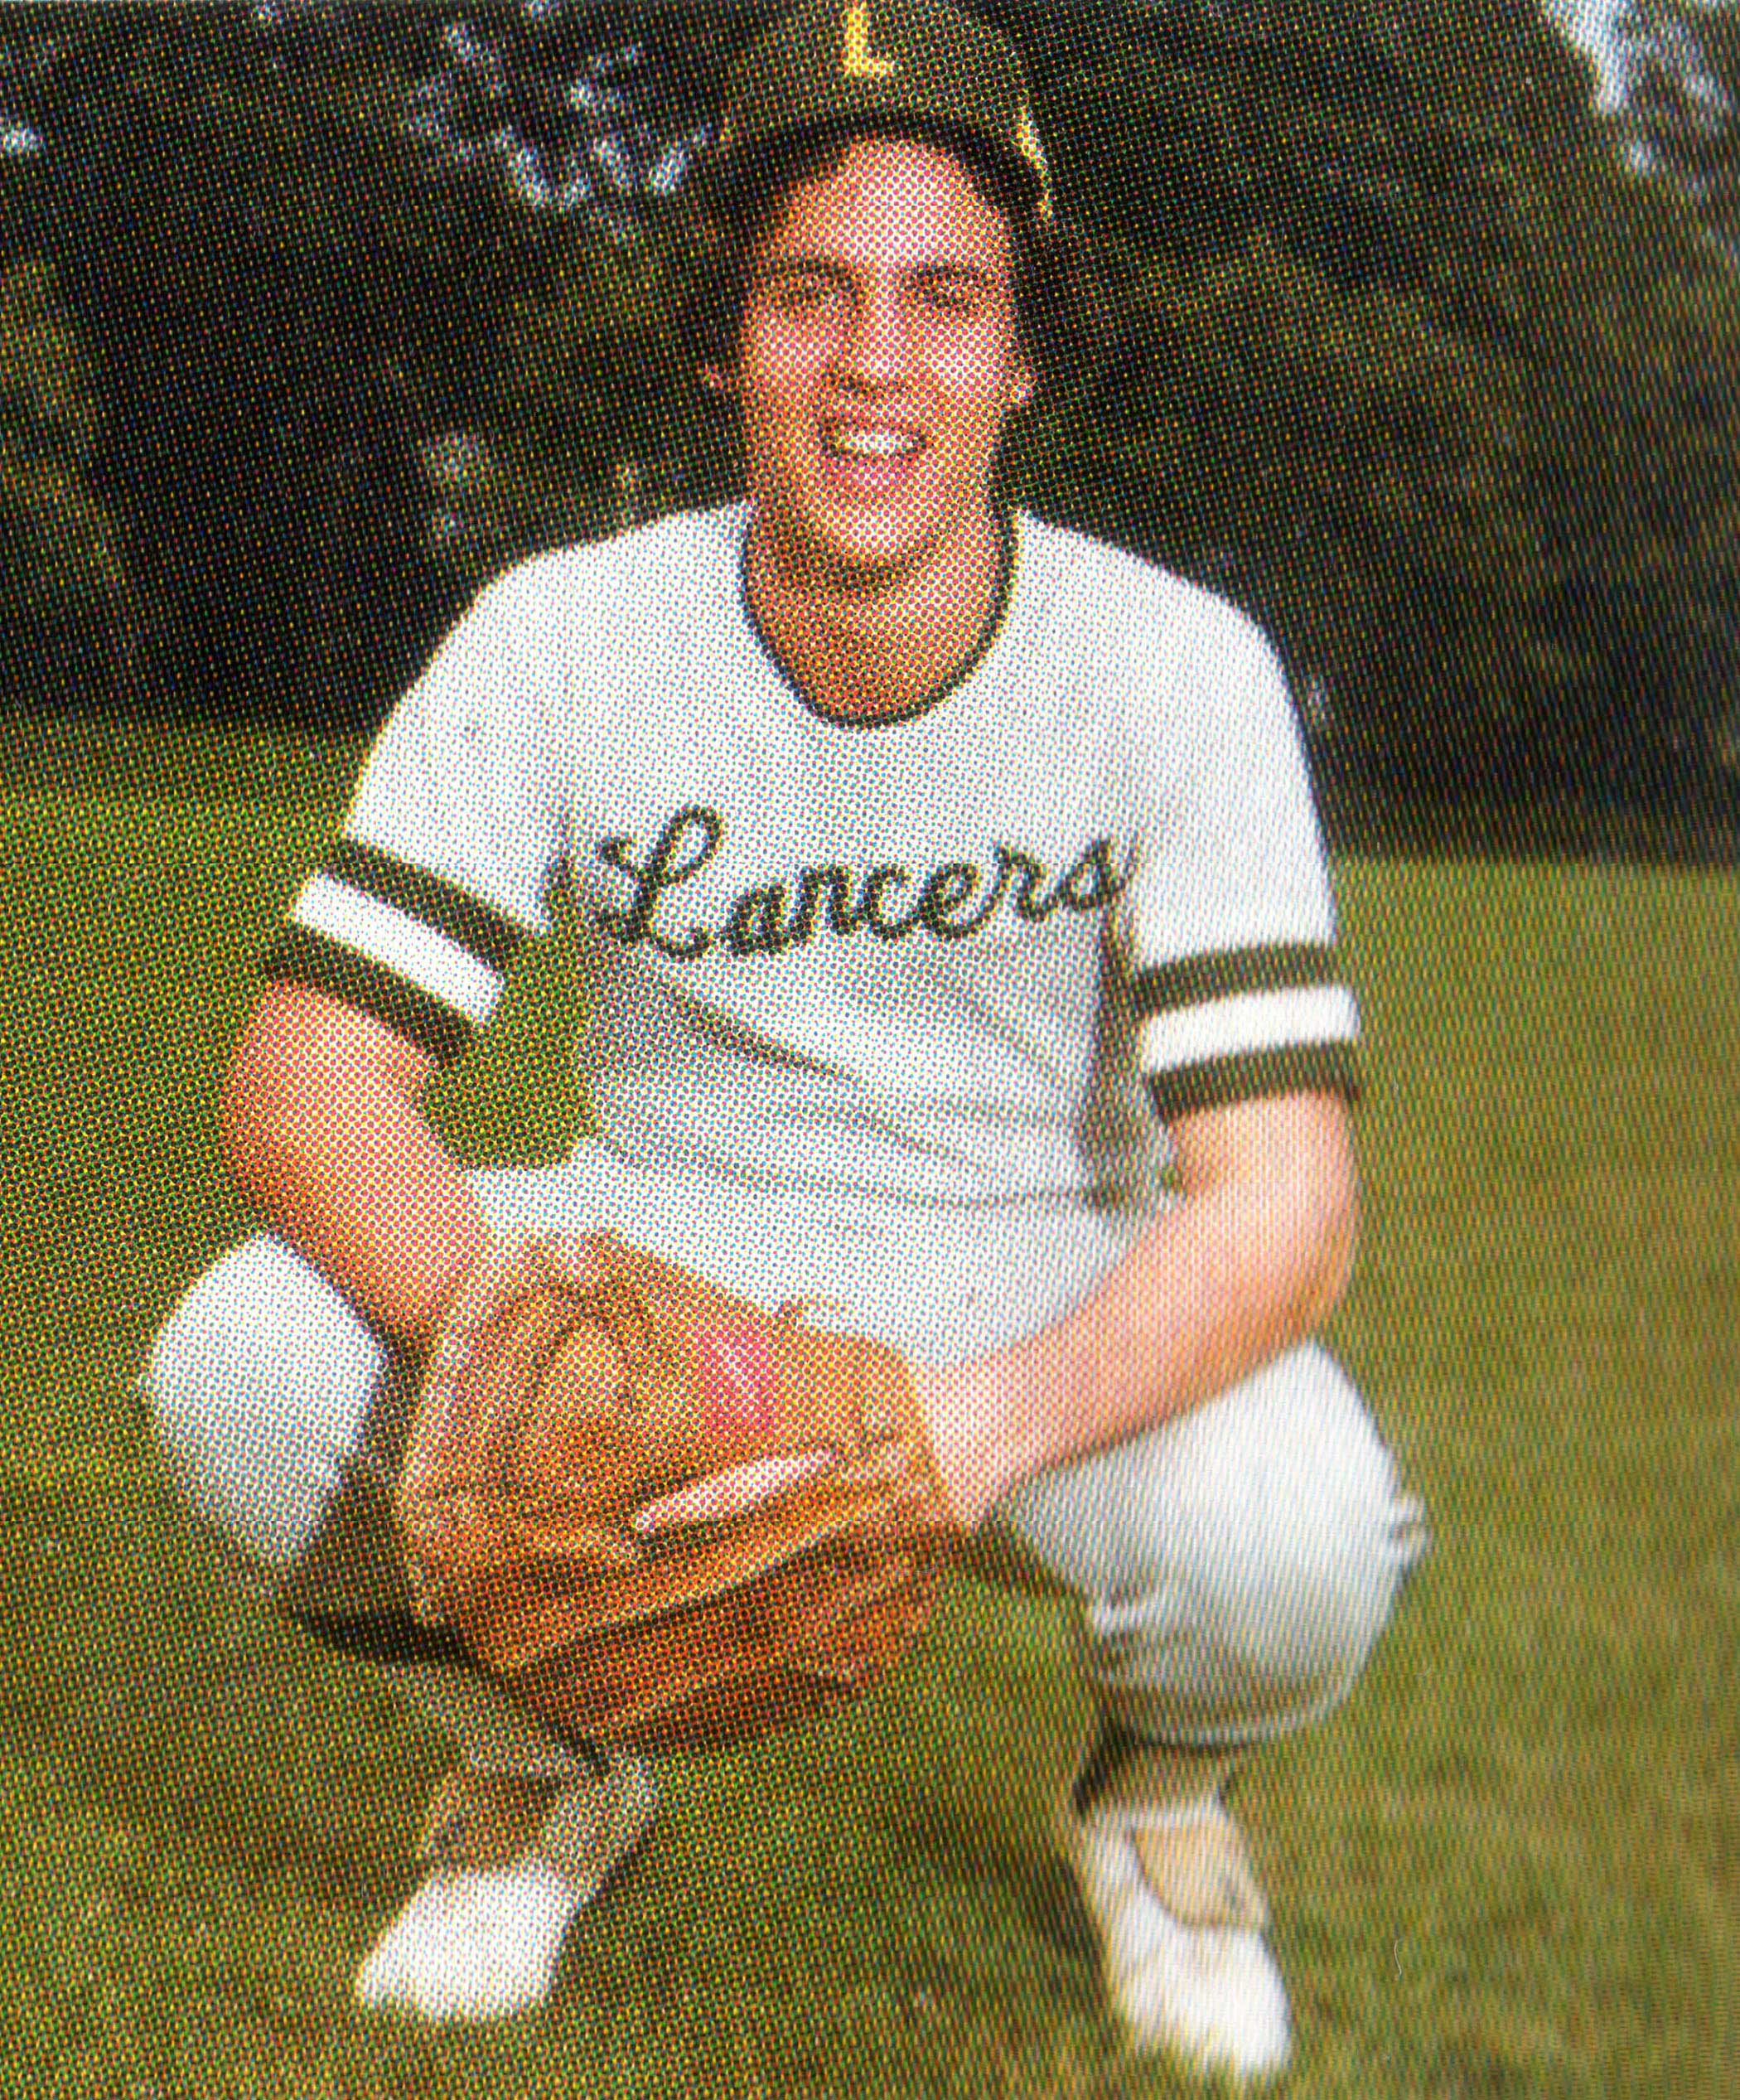 An undated photo of Chris Christie, who played catcher for the Livingston High School varsity baseball team.